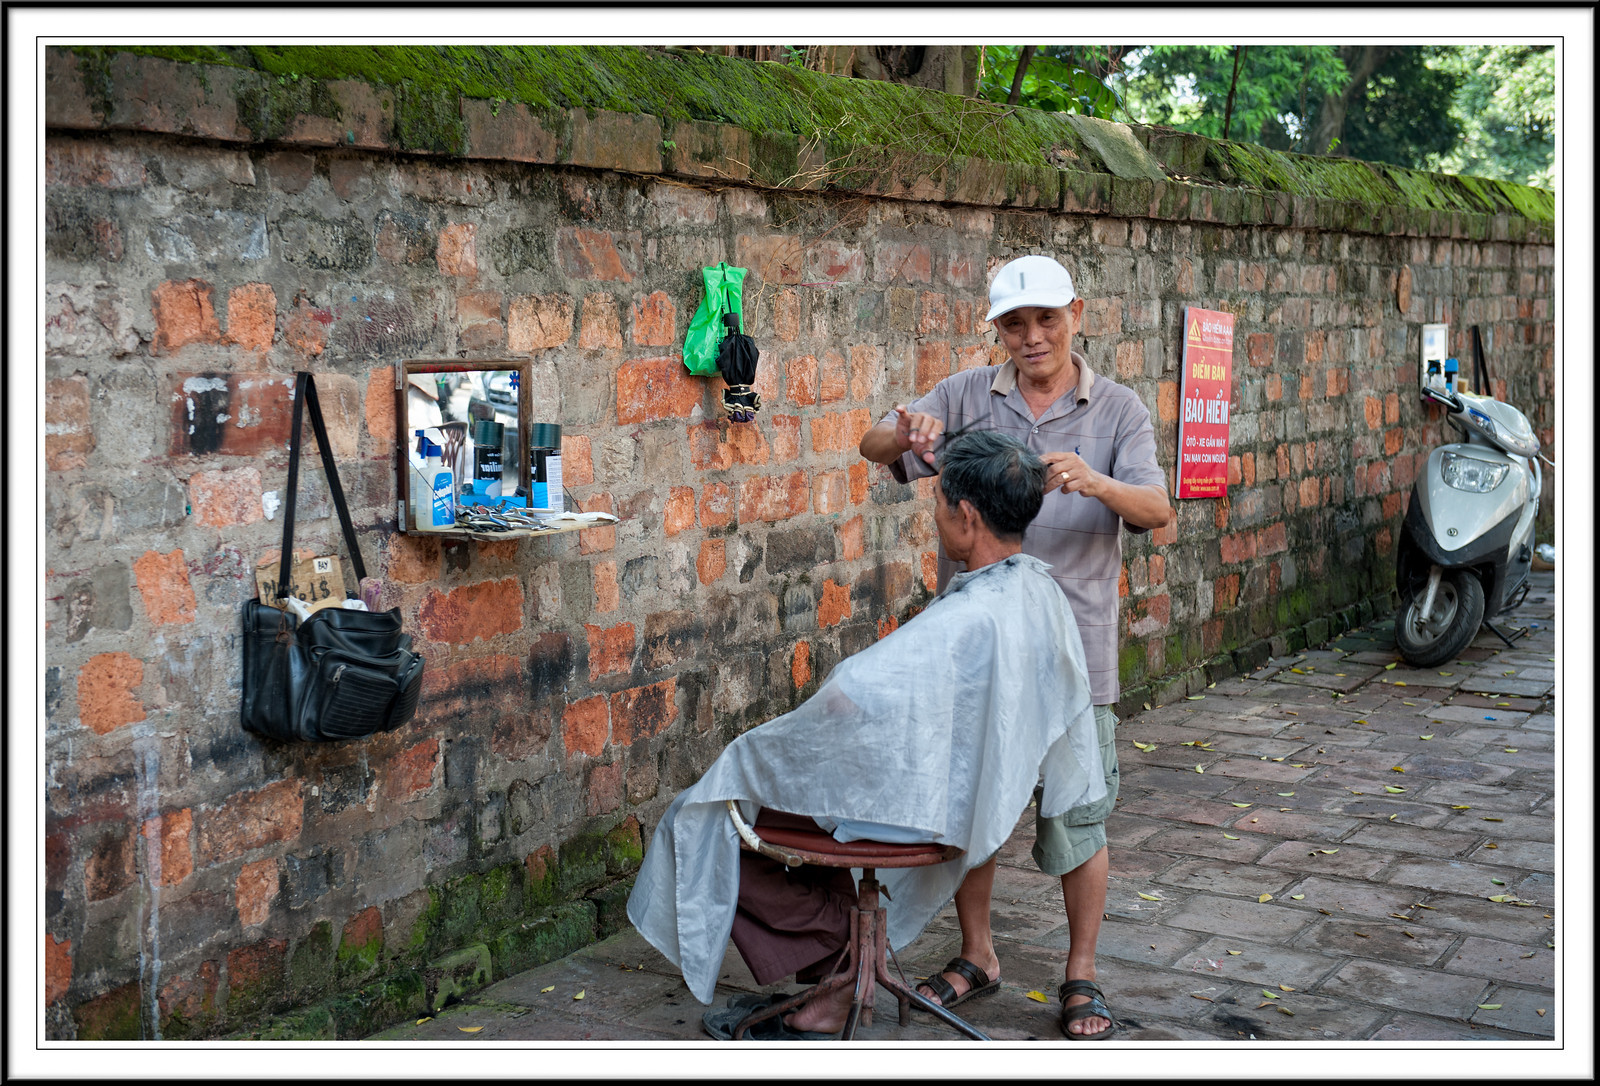      

 
  A barber on the streets of Hanoi Vietnam.
 






















     